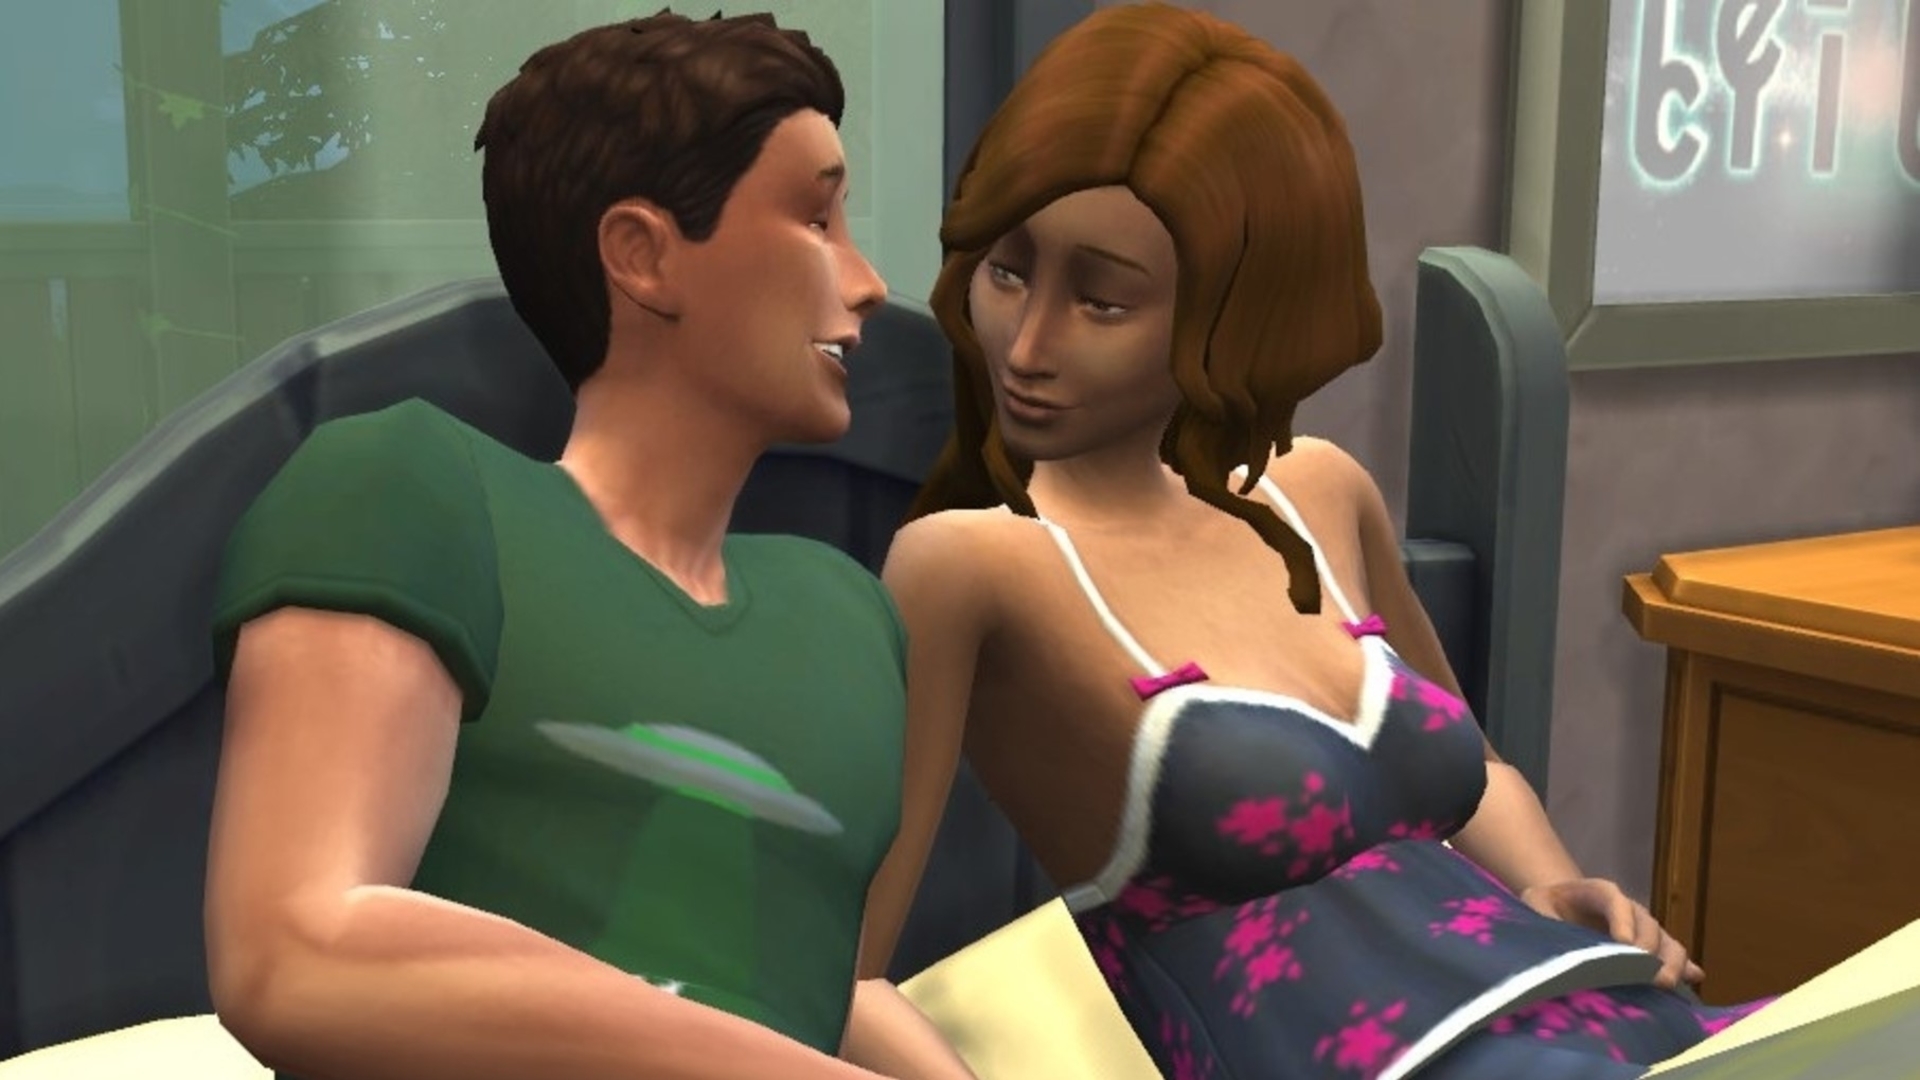 Sims sex mods in Brussels